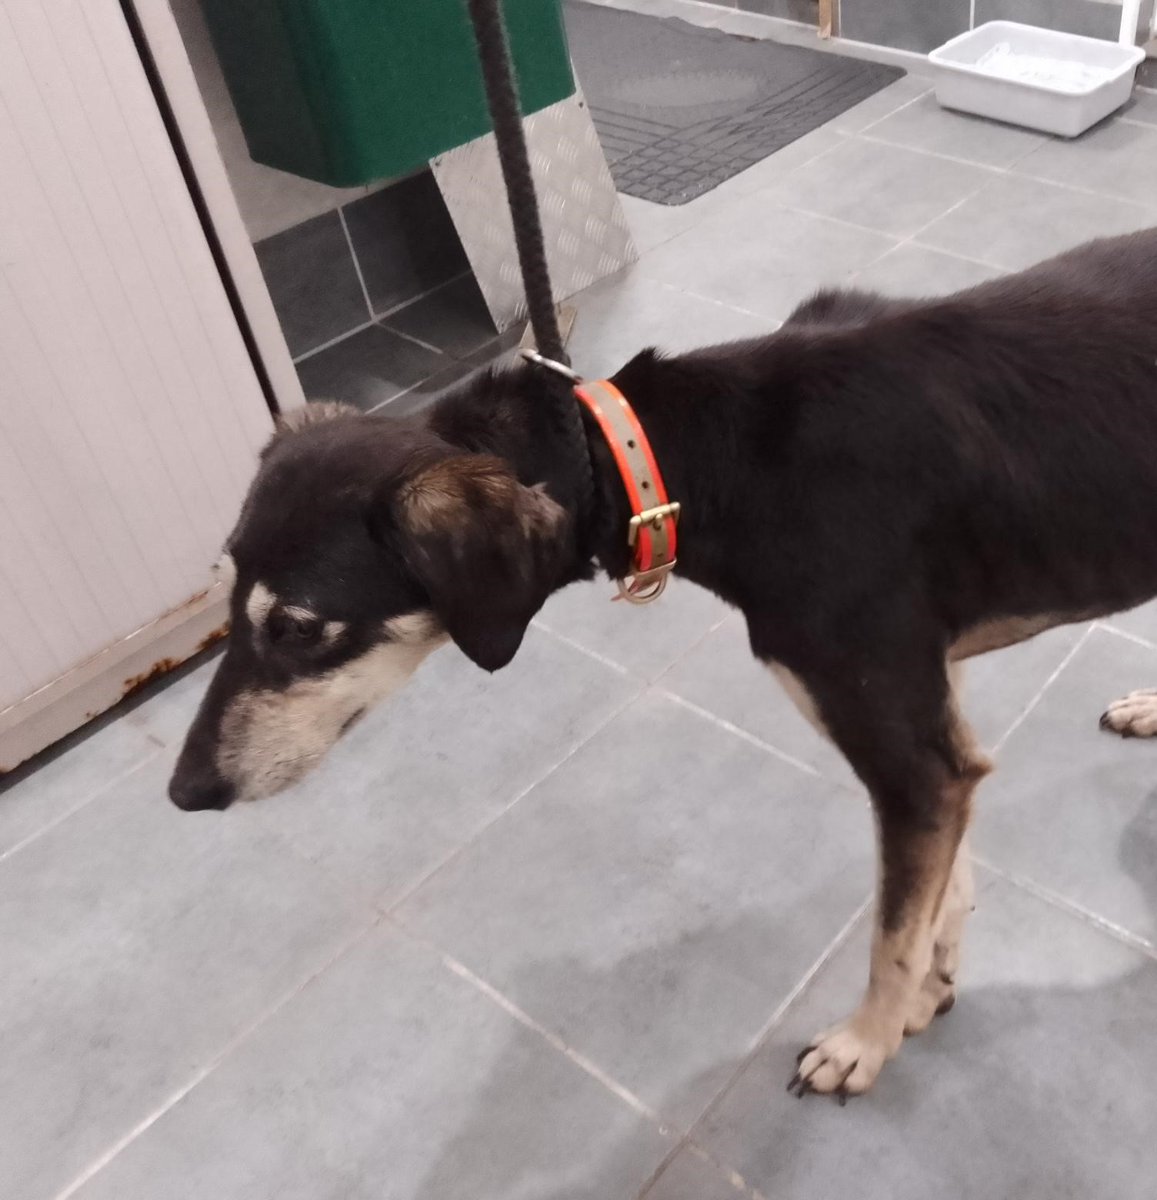 Please retweet to HELP FIND THE OWNER OR A RESCUE SPACE FOR THIS FOUND / ABANDONED DOG #STALBANS #HERTFORDSHIRE  #UK 
Female Lurcher , chip not registered, found 30 APRIL. Now in a council pound, she could be missing or stolen from another region. Proof of ownership required.…